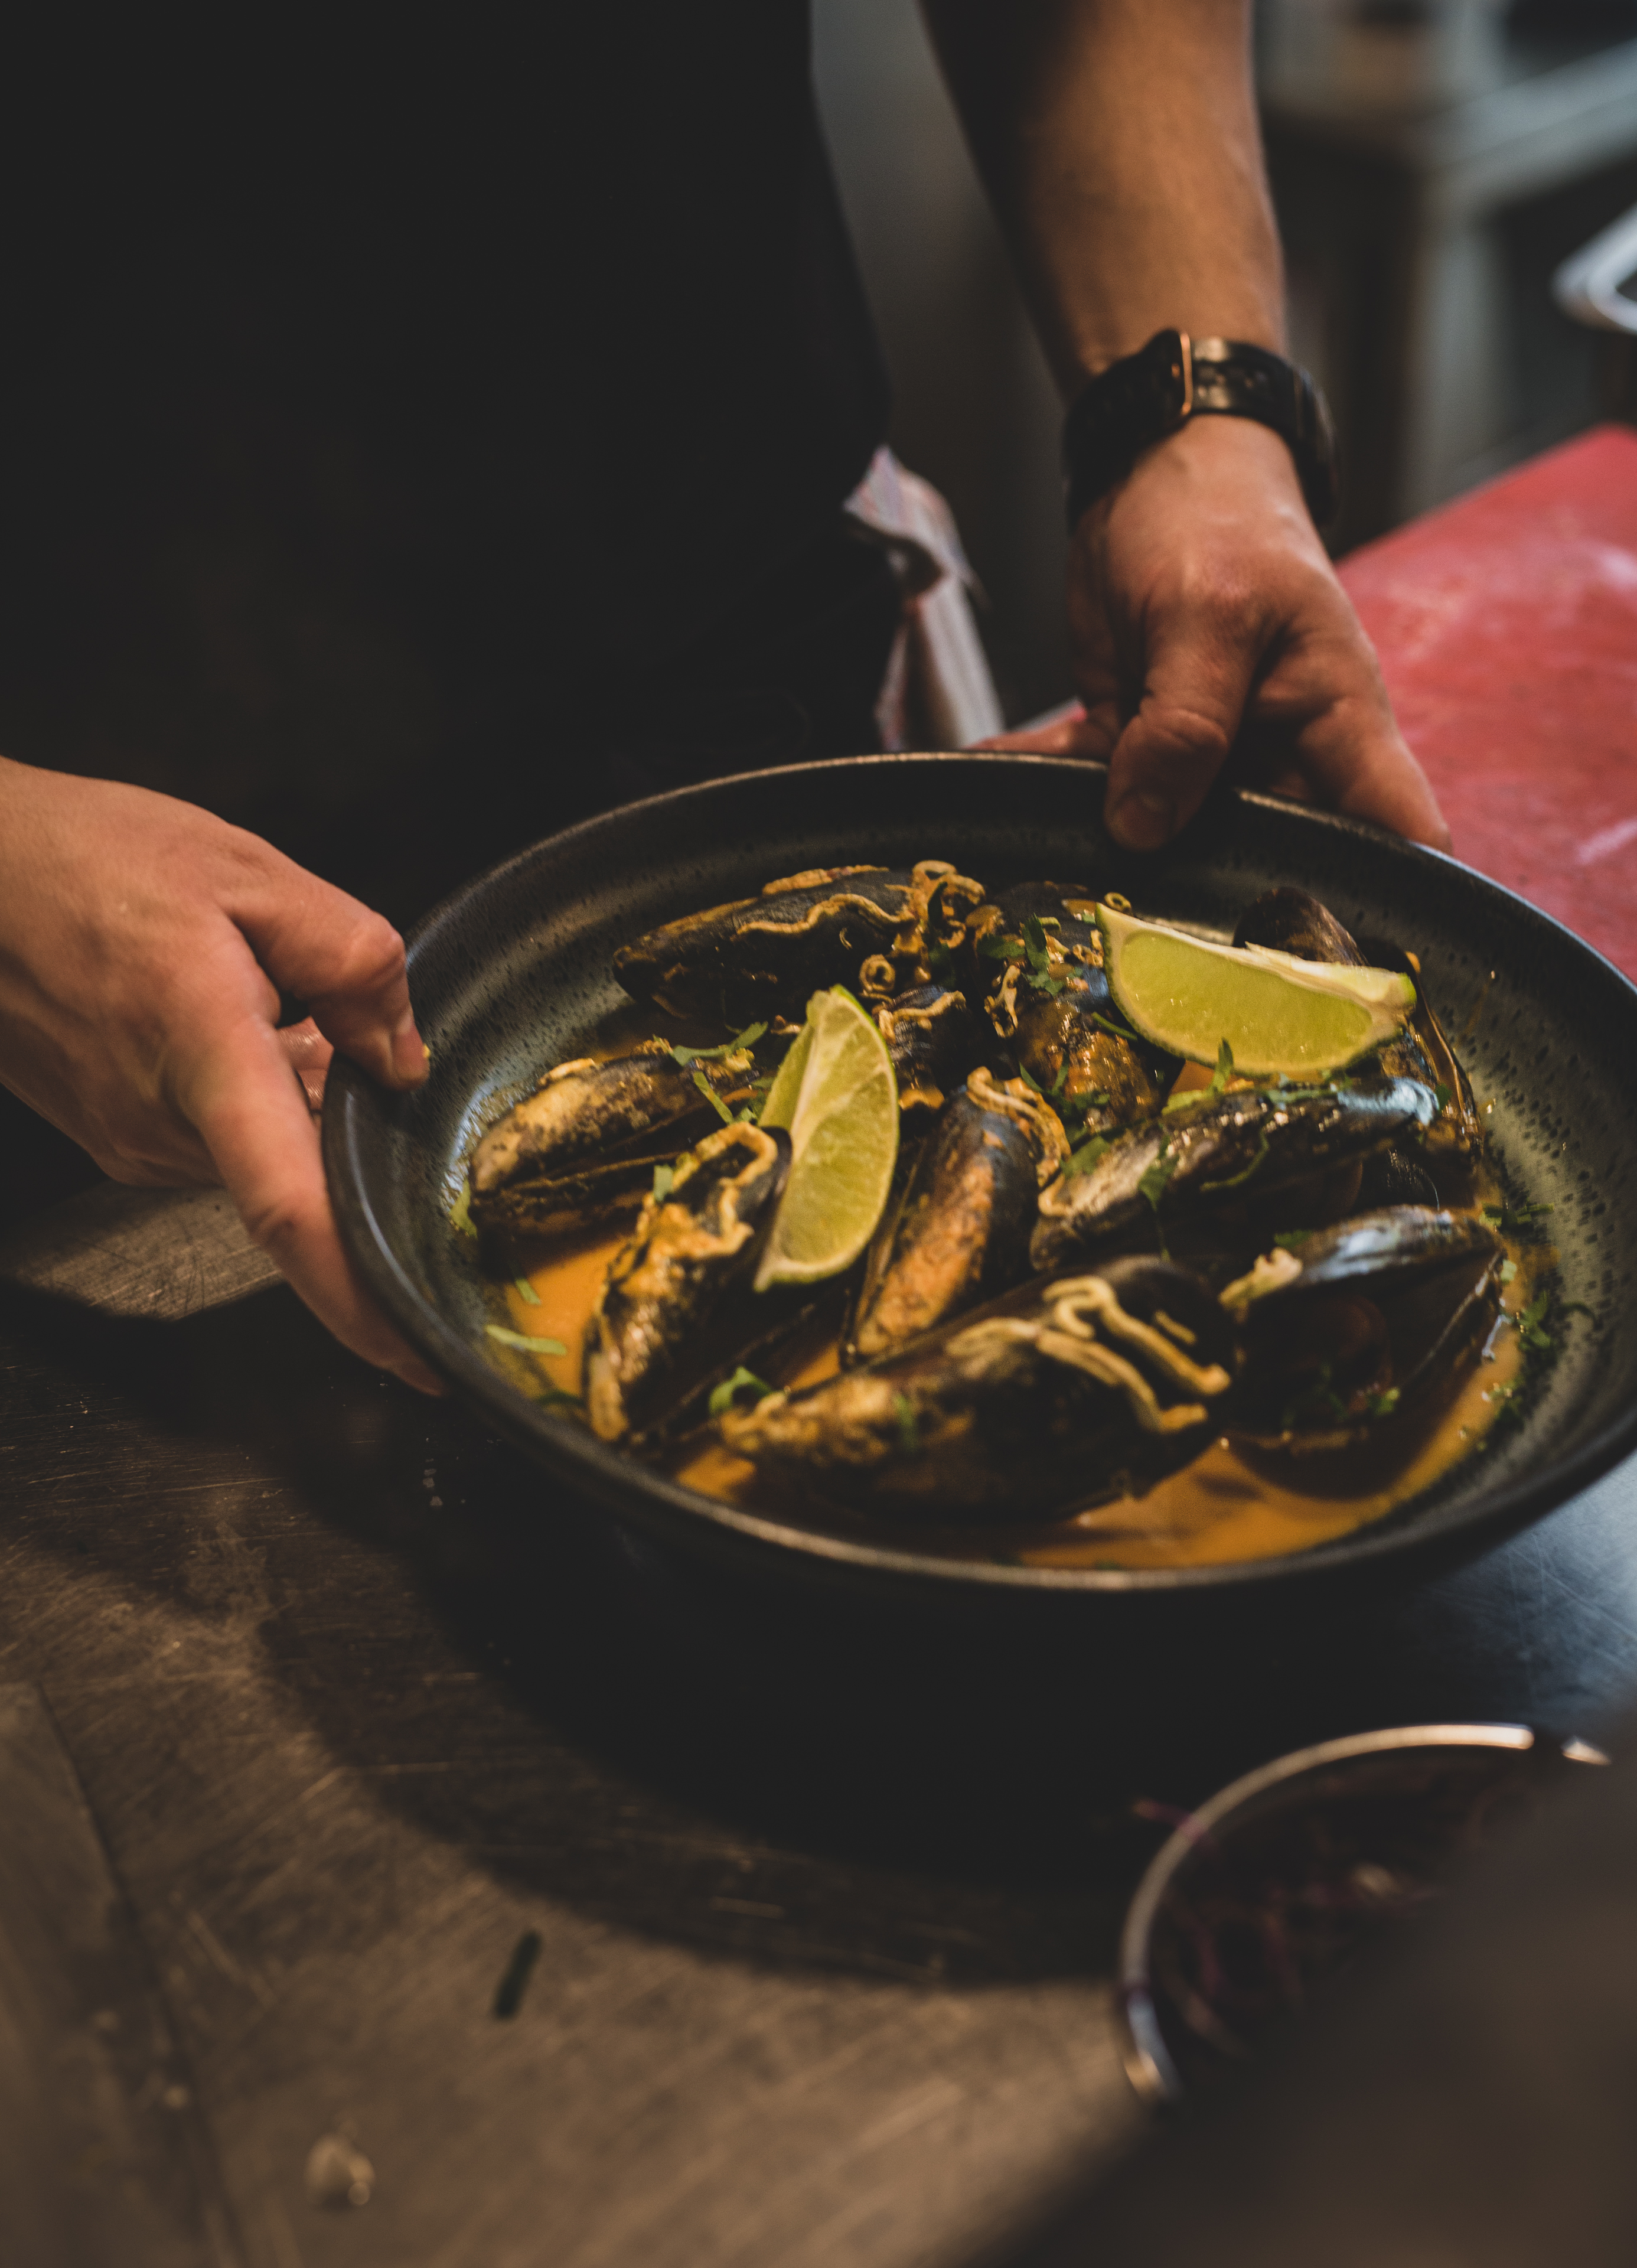 Curry-laksa mussels with sherry wine from Sanlucar de Barrameda